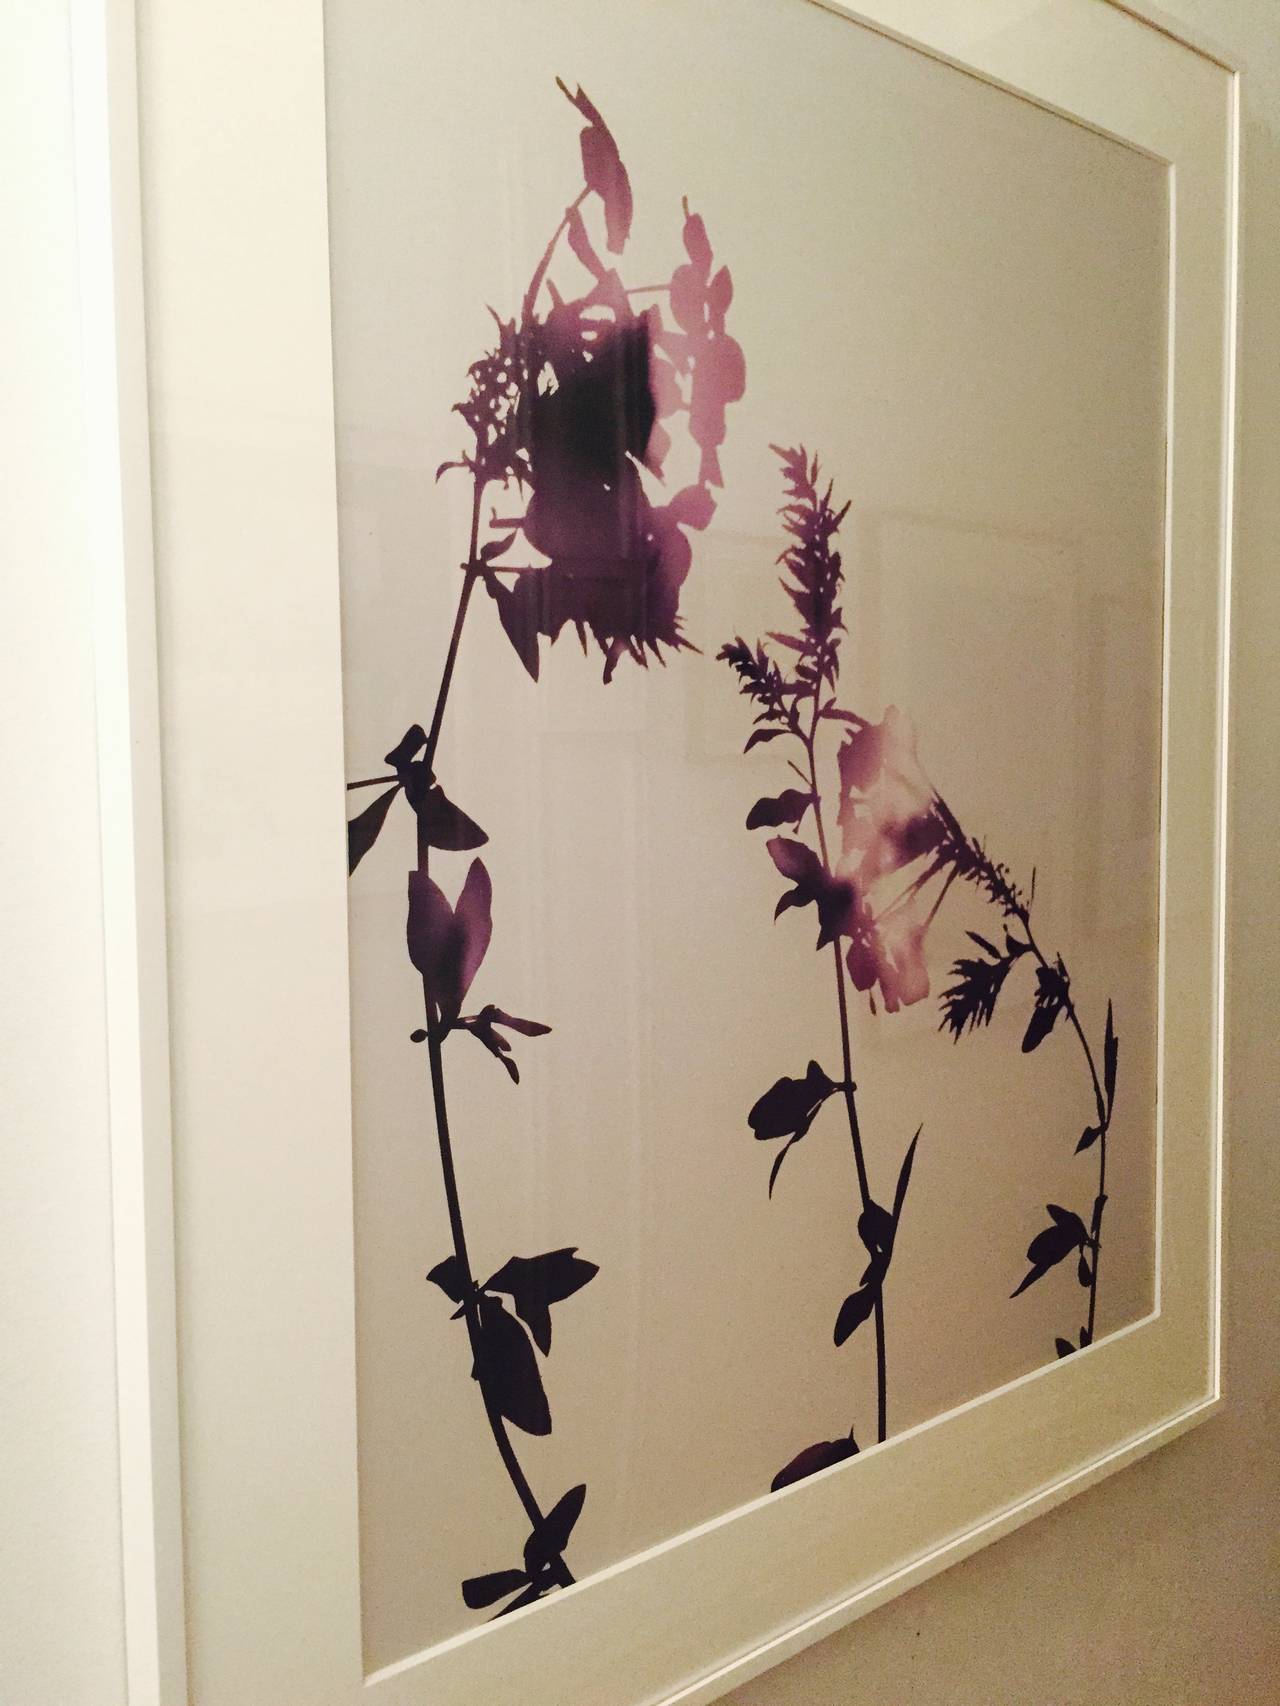 Flower Series 2004 (purple) - Photograph by James Welling